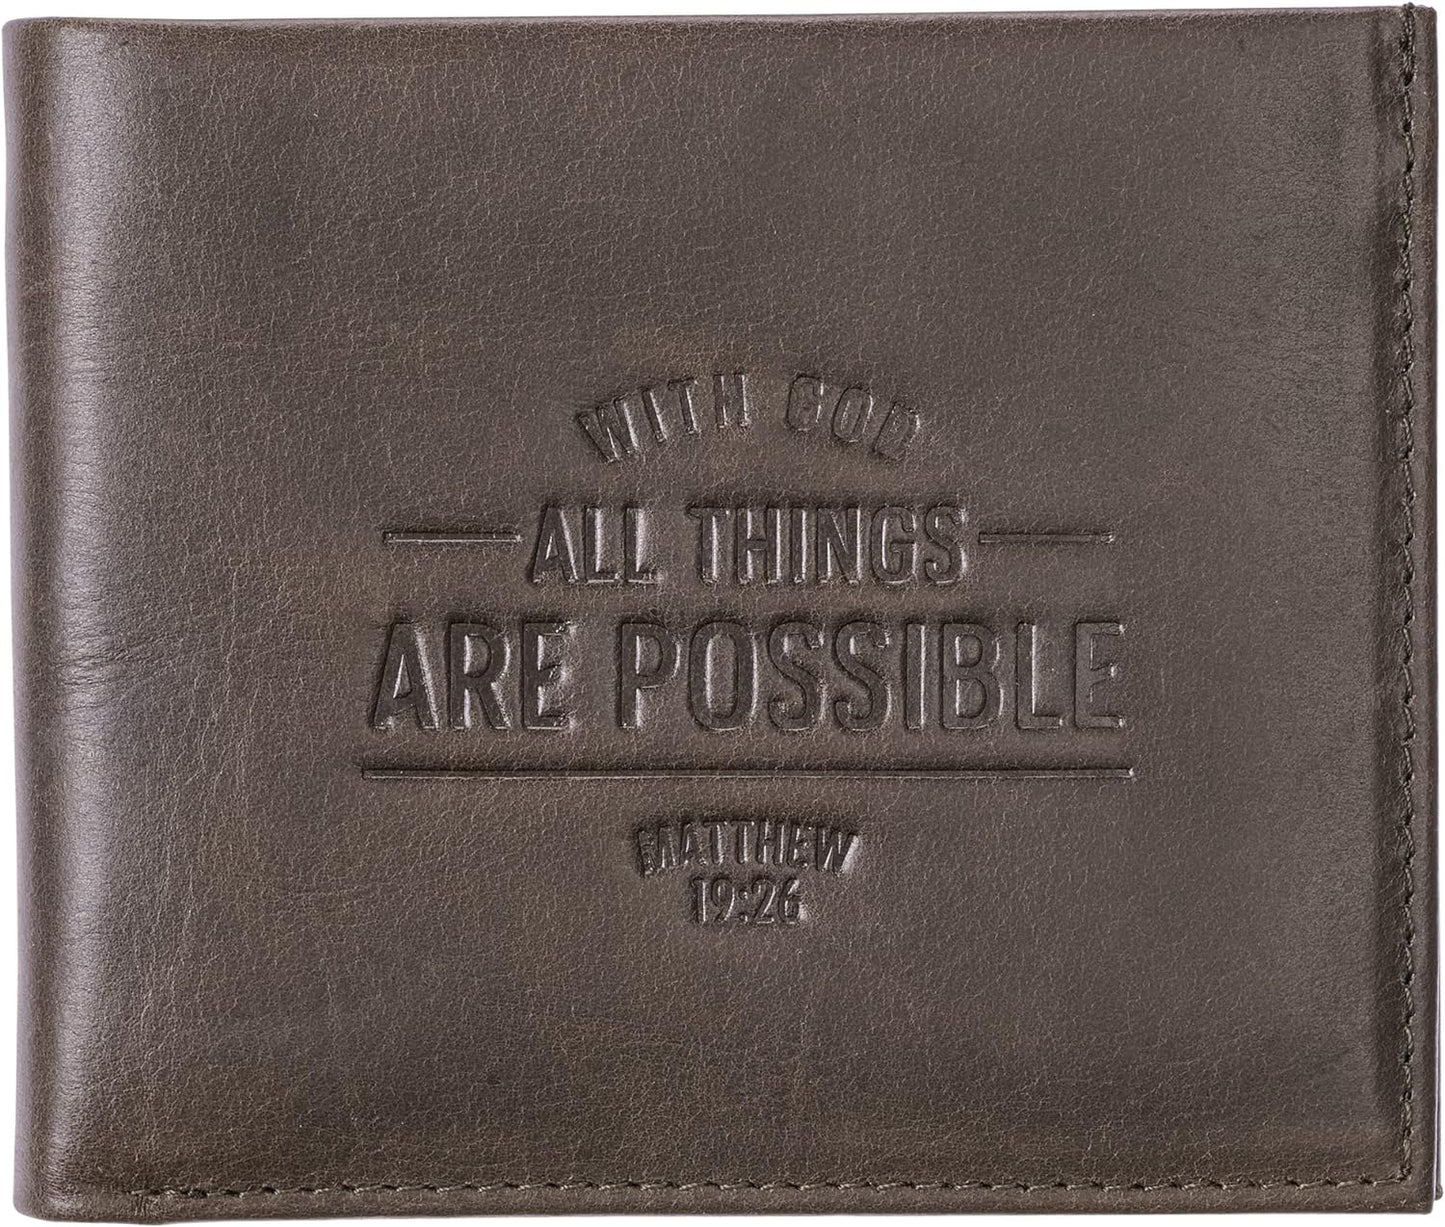 'With God All Things Are Possible' Matthew 19:26 Brown Genuine Leather Wallet